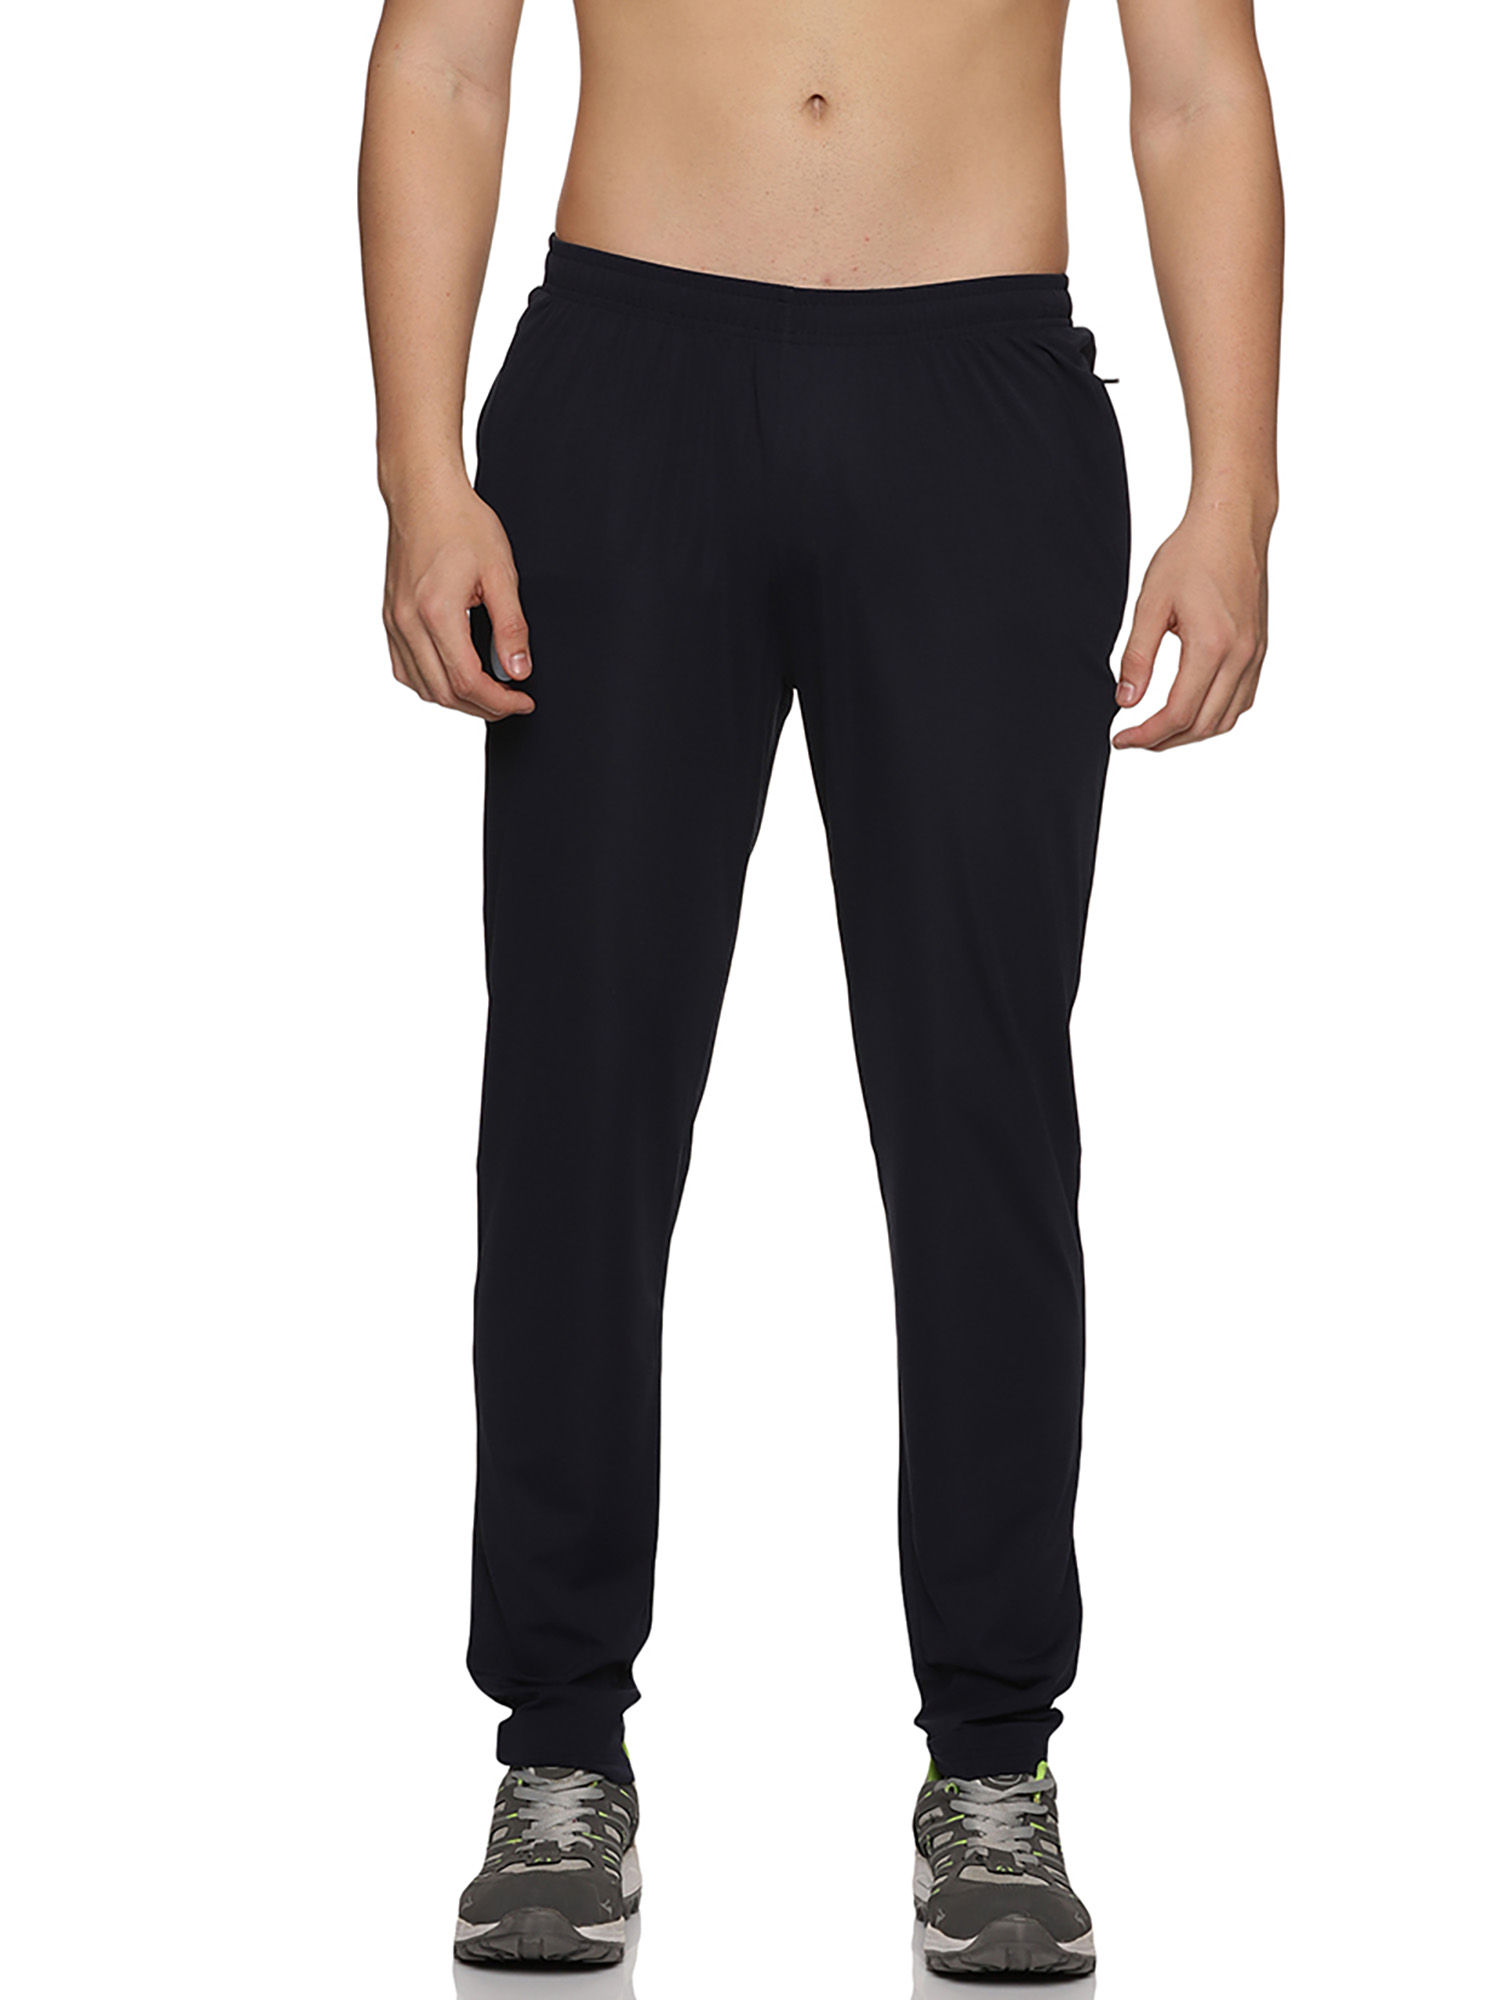 Buy Omtex Elite Athletic Trackpant for Men with Zipper Pockets Black-Navy  (Pack of 2) online